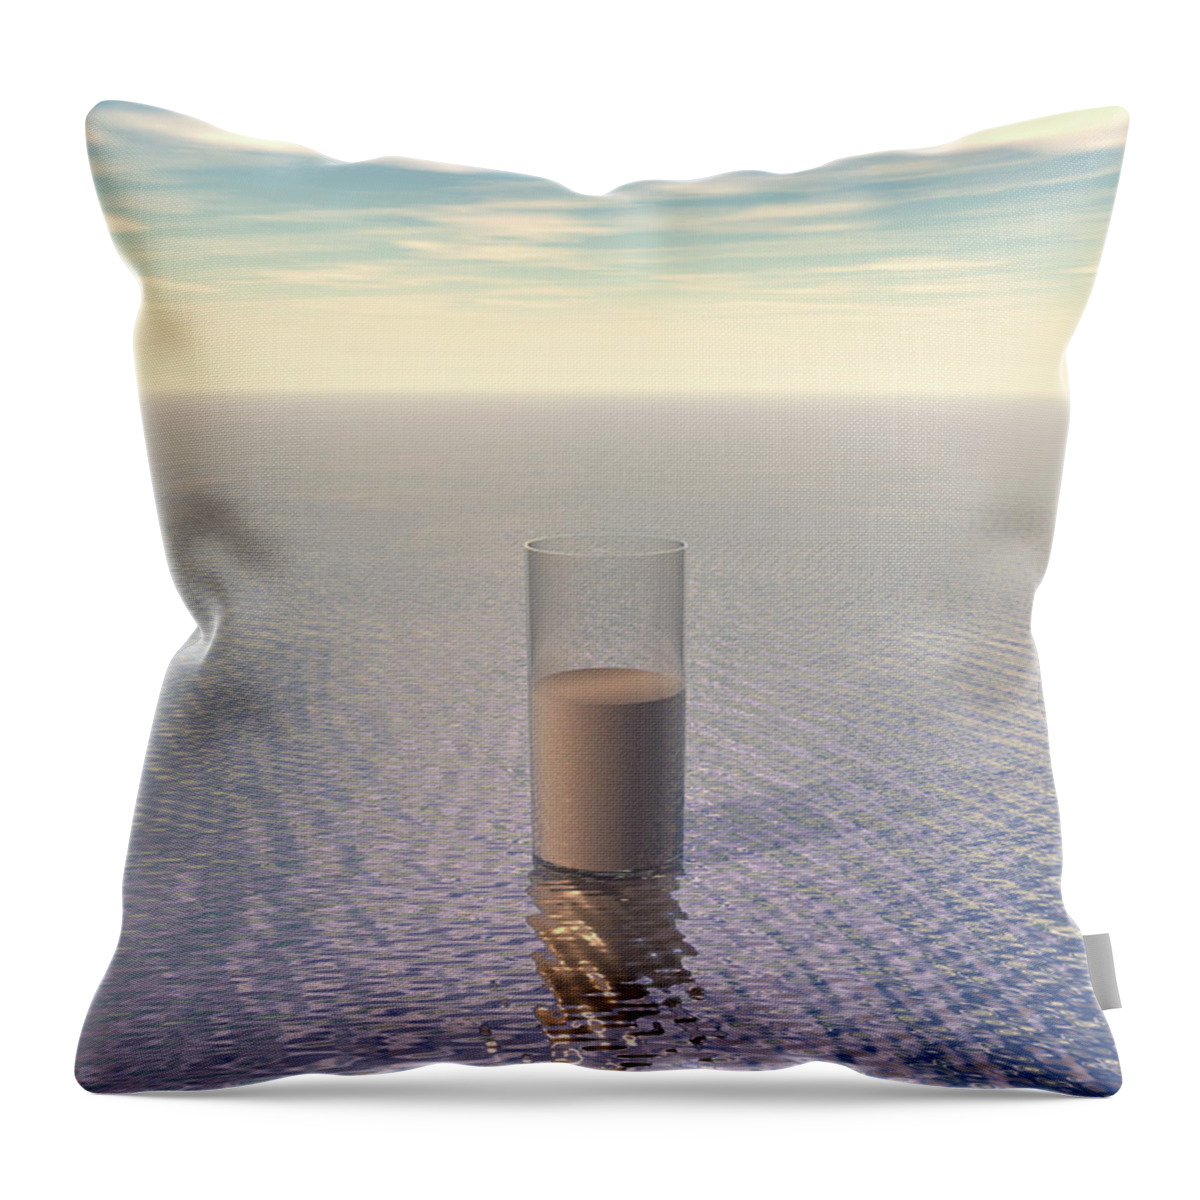 Sand Throw Pillow featuring the digital art A Glass of Sand by Phil Perkins